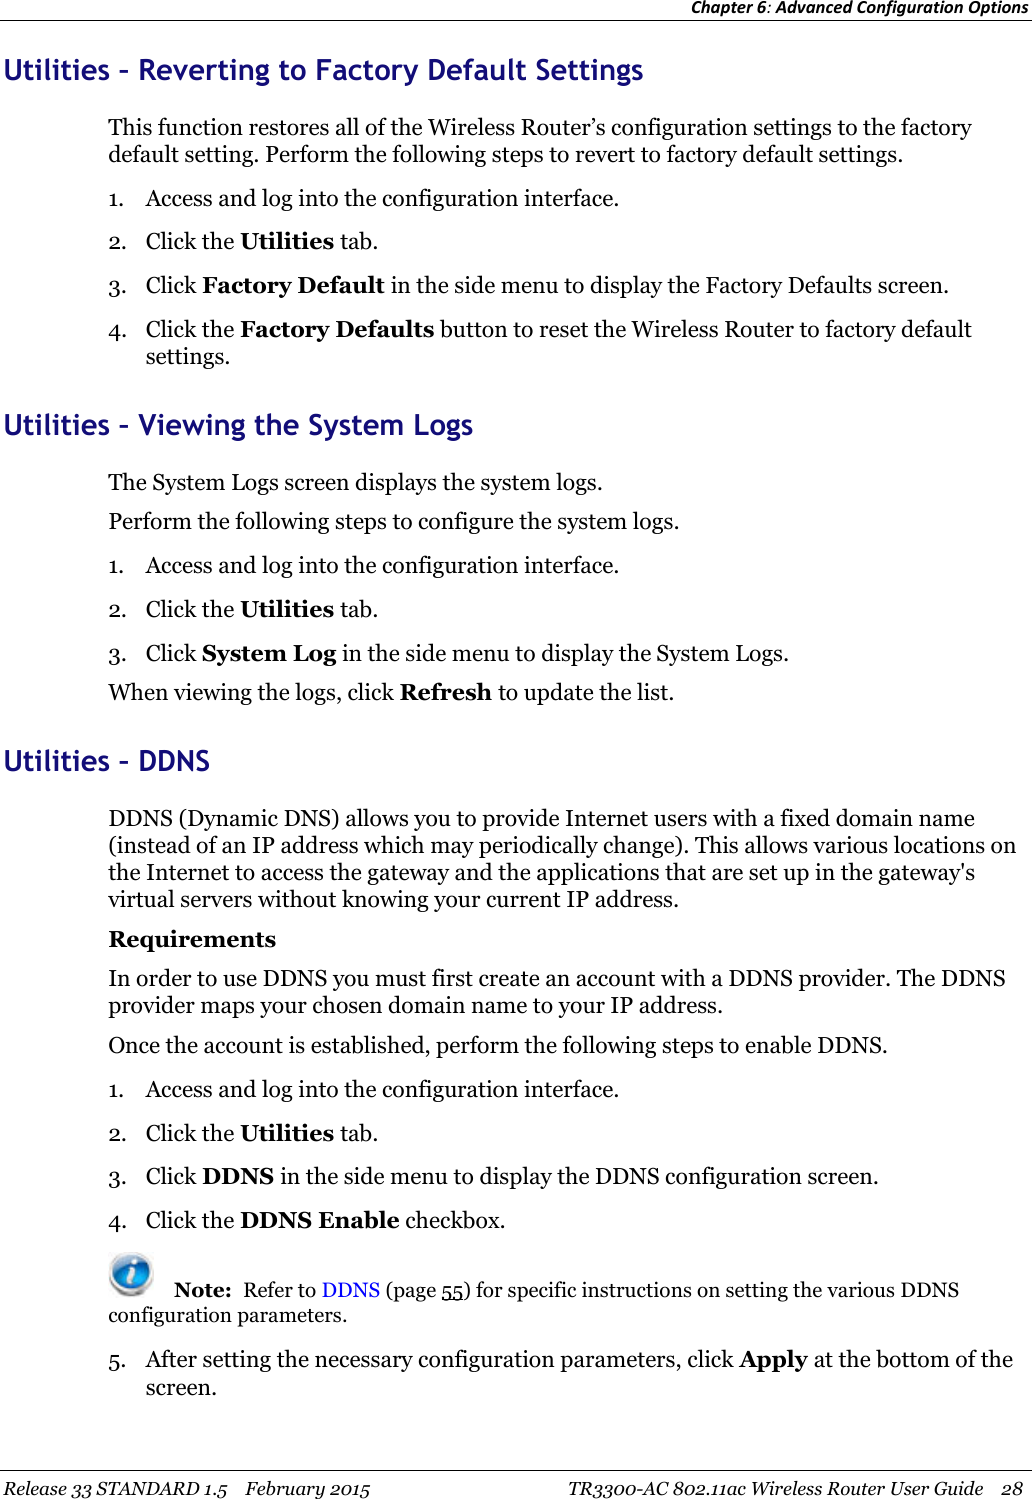 Chapter 6:Advanced Configuration OptionsRelease 33 STANDARD 1.5 February 2015 TR3300-AC 802.11ac Wireless Router User Guide 28Utilities – Reverting to Factory Default SettingsThis function restores all of the Wireless Router’s configuration settings to the factorydefault setting. Perform the following steps to revert to factory default settings.1. Access and log into the configuration interface.2. Click the Utilities tab.3. Click Factory Default in the side menu to display the Factory Defaults screen.4. Click the Factory Defaults button to reset the Wireless Router to factory defaultsettings.Utilities – Viewing the System LogsThe System Logs screen displays the system logs.Perform the following steps to configure the system logs.1. Access and log into the configuration interface.2. Click the Utilities tab.3. Click System Log in the side menu to display the System Logs.When viewing the logs, click Refresh to update the list.Utilities – DDNSDDNS (Dynamic DNS) allows you to provide Internet users with a fixed domain name(instead of an IP address which may periodically change). This allows various locations onthe Internet to access the gateway and the applications that are set up in the gateway&apos;svirtual servers without knowing your current IP address.RequirementsIn order to use DDNS you must first create an account with a DDNS provider. The DDNSprovider maps your chosen domain name to your IP address.Once the account is established, perform the following steps to enable DDNS.1. Access and log into the configuration interface.2. Click the Utilities tab.3. Click DDNS in the side menu to display the DDNS configuration screen.4. Click the DDNS Enable checkbox.Note: Refer to DDNS (page 55) for specific instructions on setting the various DDNSconfiguration parameters.5. After setting the necessary configuration parameters, click Apply at the bottom of thescreen.